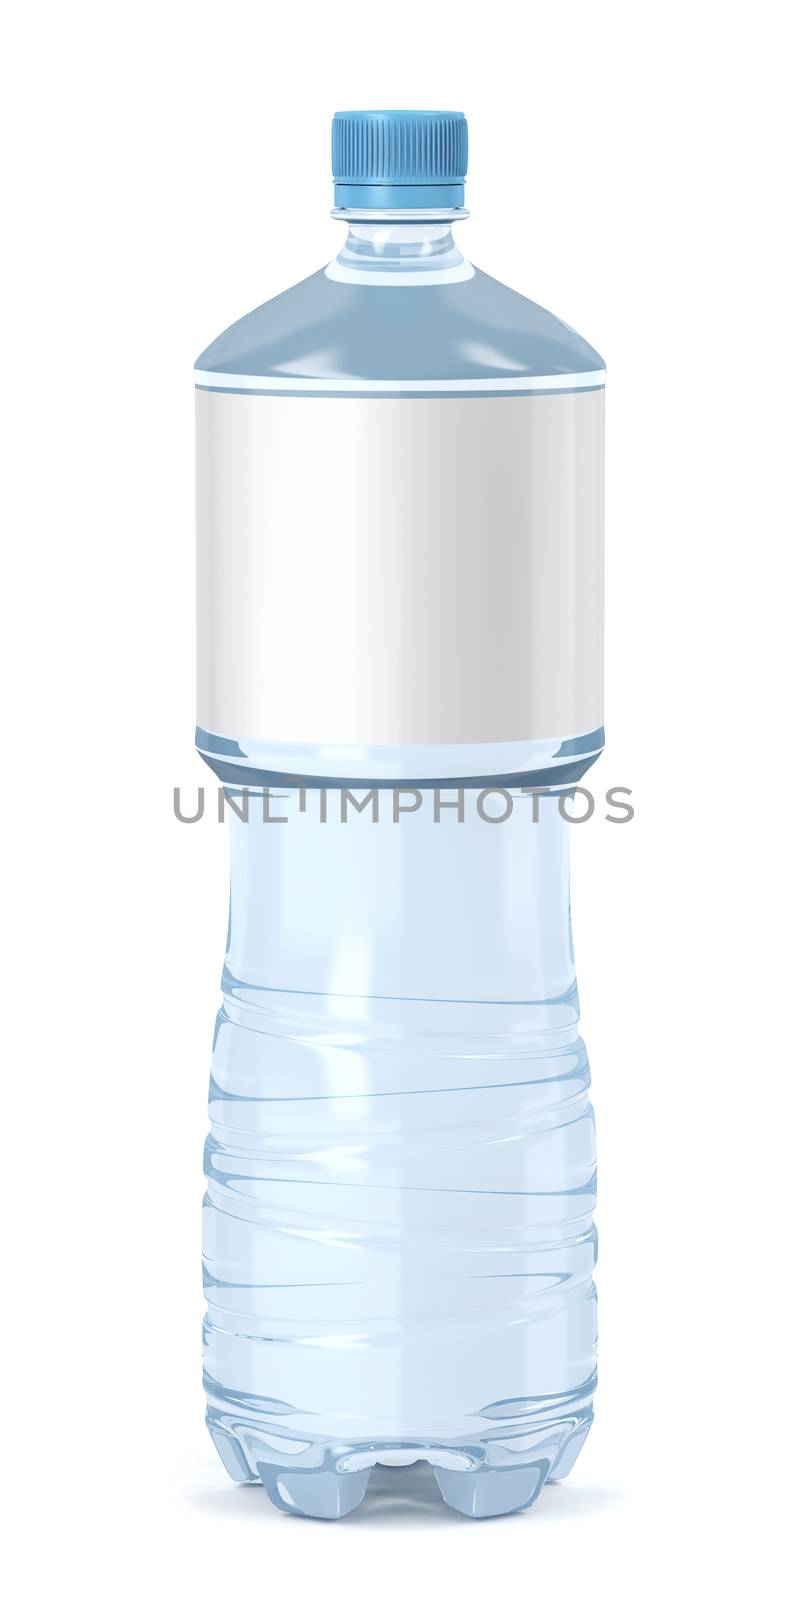 Water bottle with blank label on white background